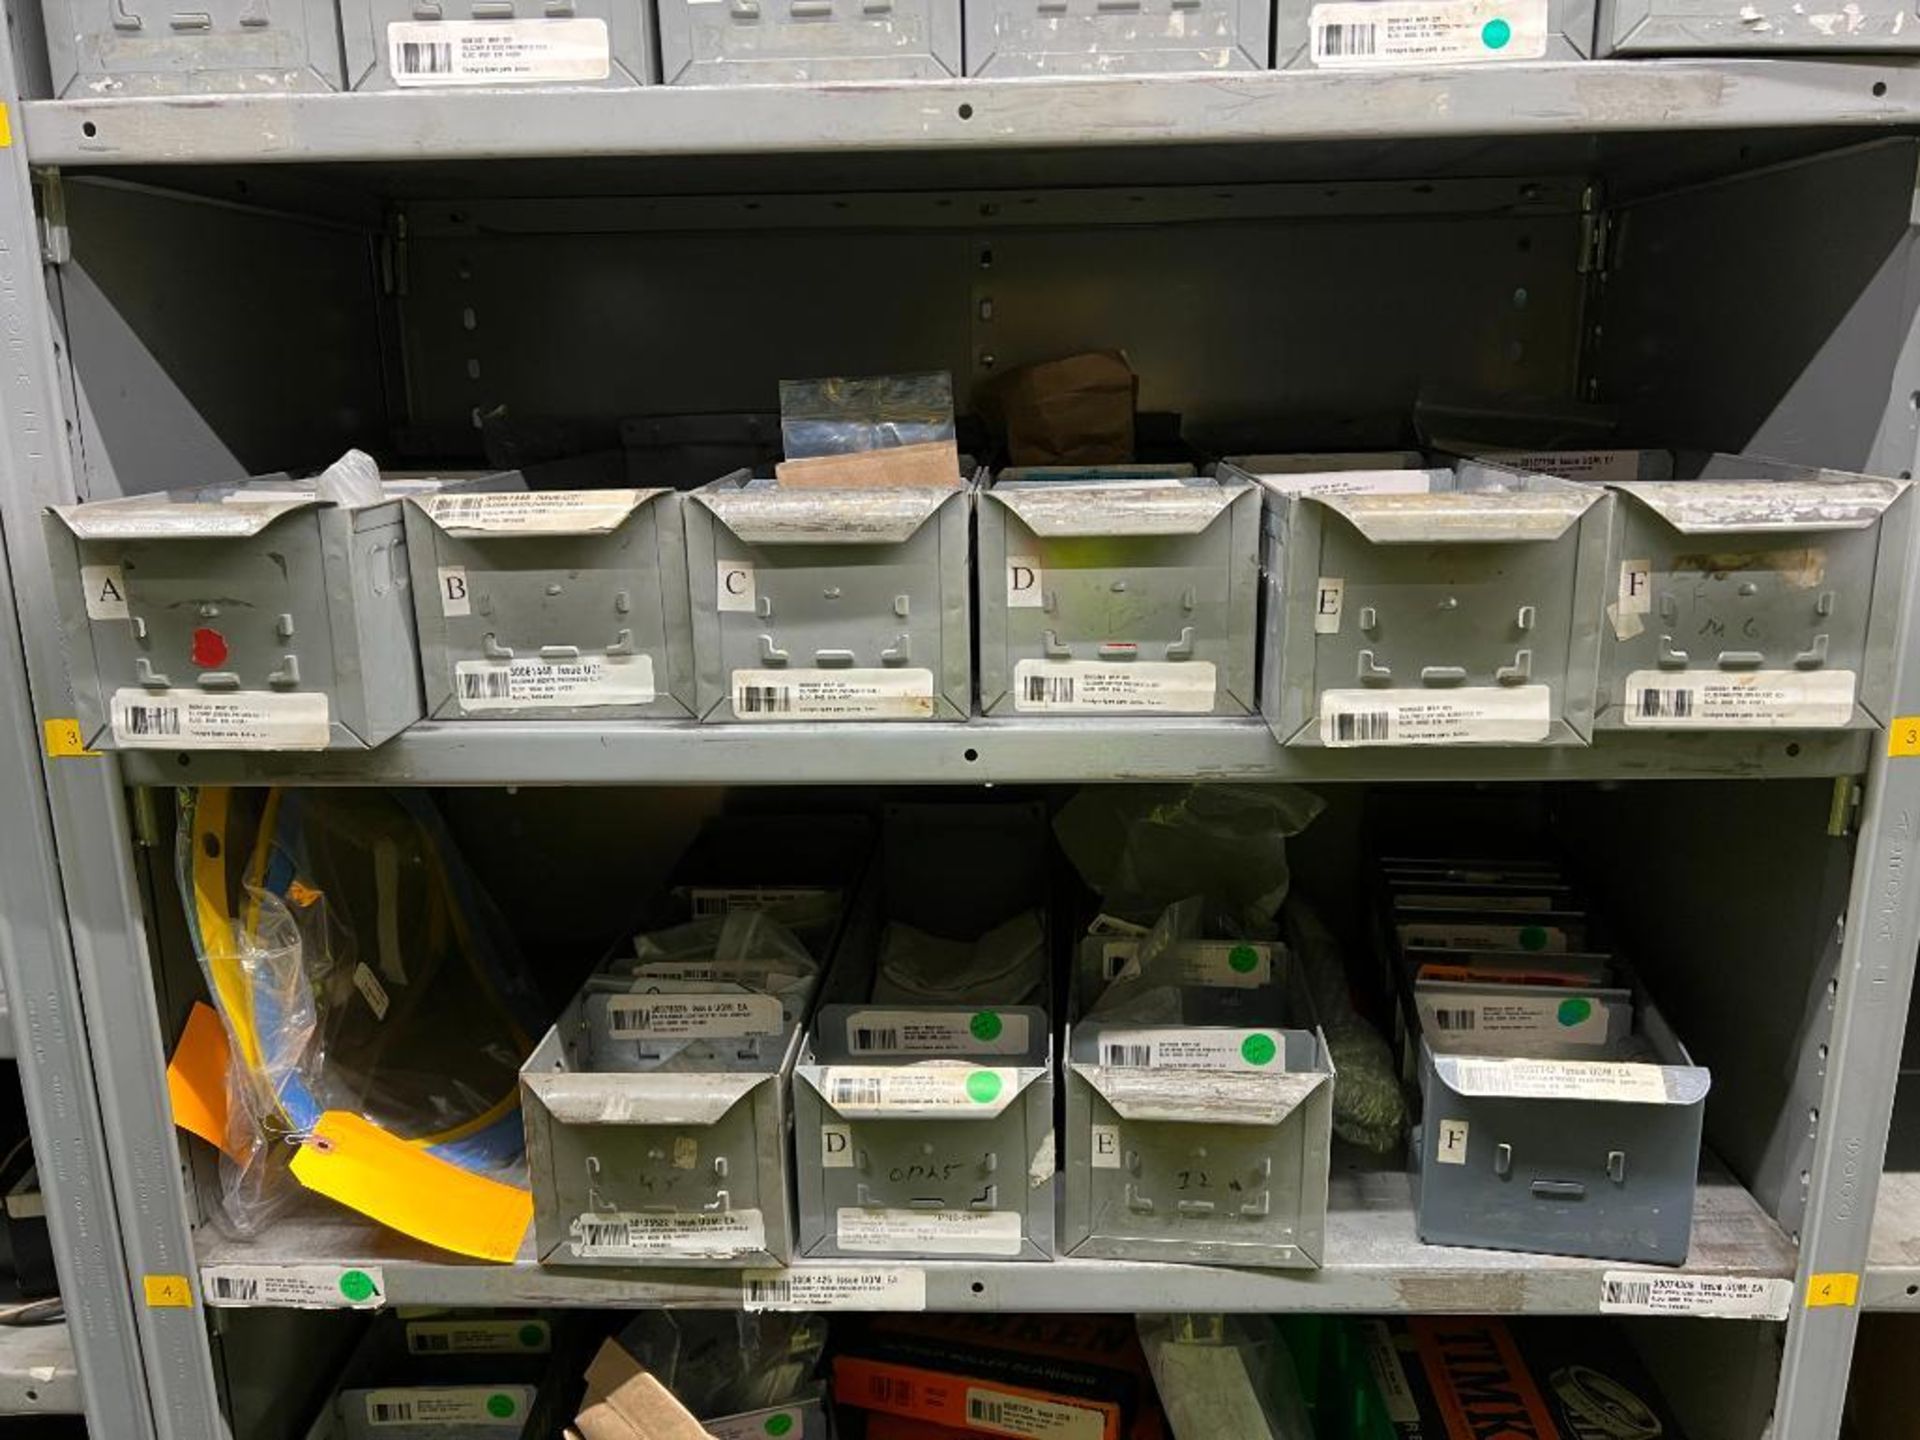 contents of gray shelving units to include, bearings, shafts, filters, fuses, pneumatic scale parts, - Image 18 of 141